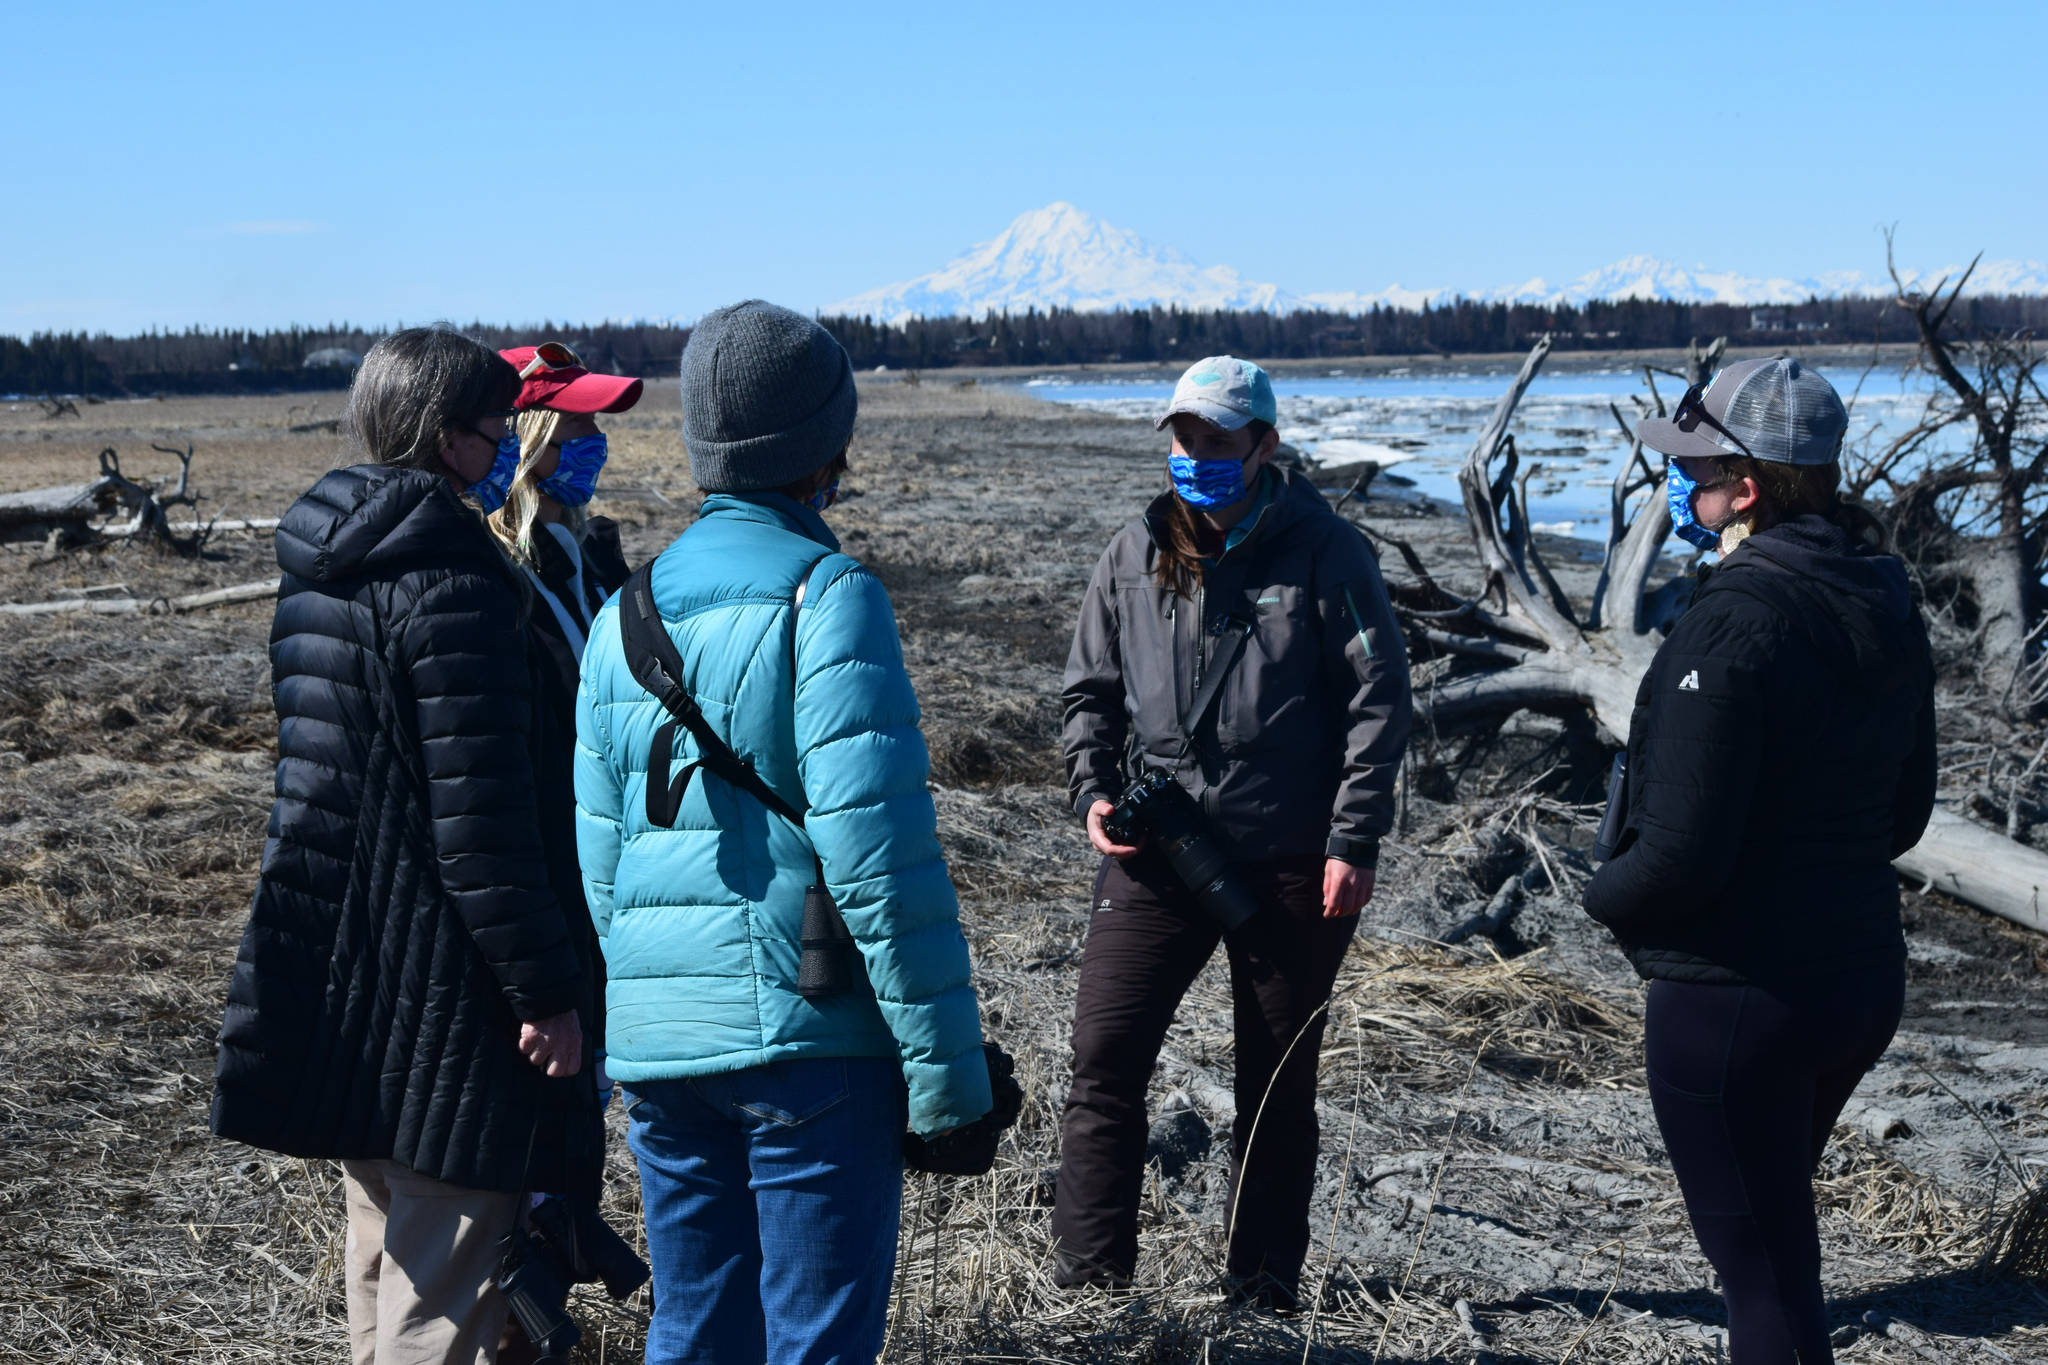 From left to right, counter-clock wise: Mia Werger, Teresa Becher, Deborah Boege Tobin, Madison Kosma, and Suzanne Steinert monitor beluga whales at the Kenai River on Saturday, April 24, 2021. (Photo by Camille Botello/Peninsula Clarion)